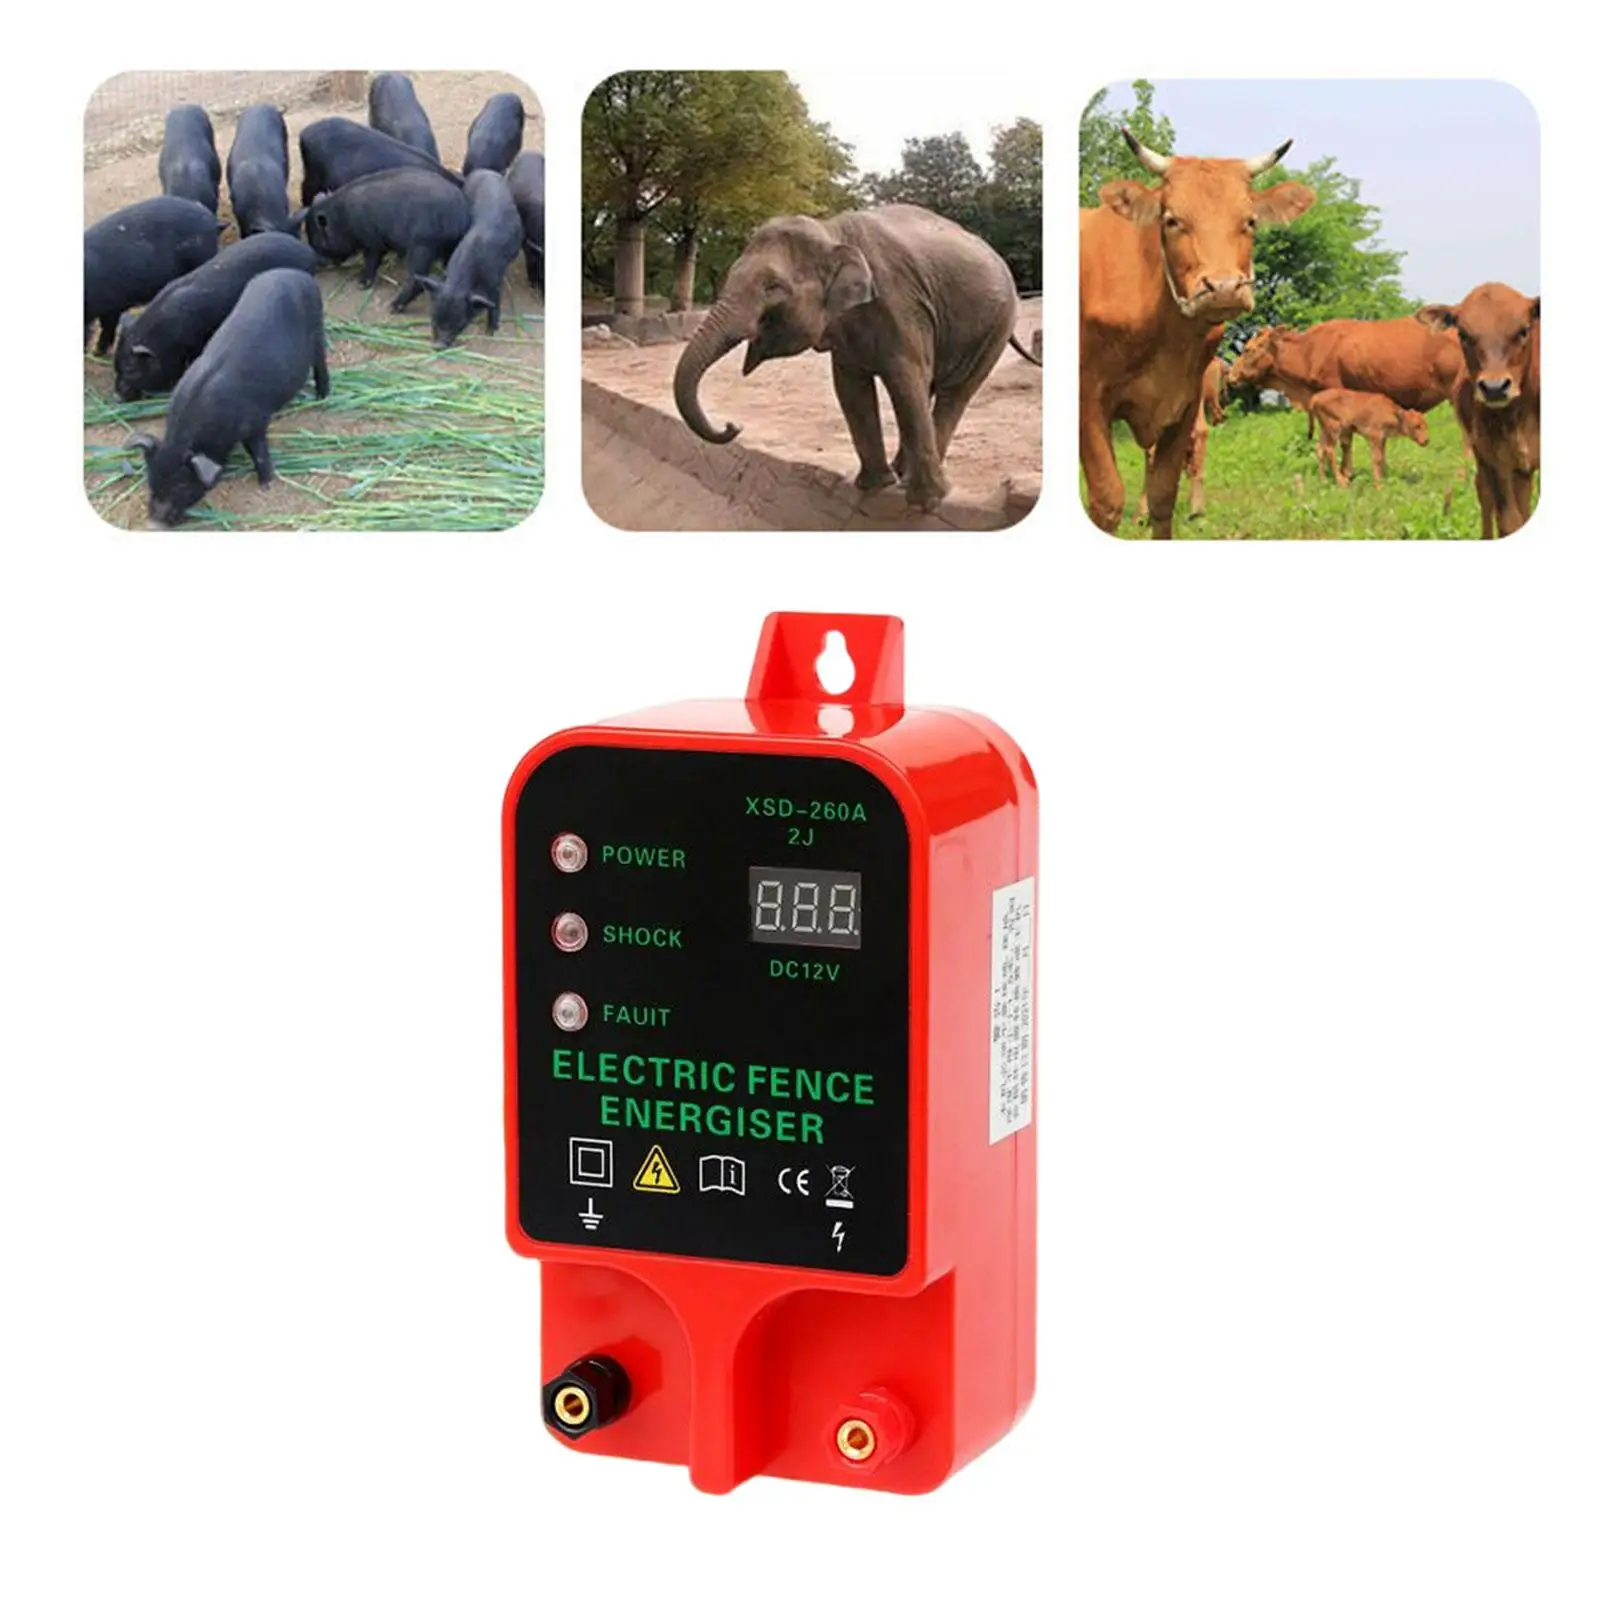 Portable Electric Fence High Voltage Durable 10km Agricultural Fencing Rechargeable for Cattle Sheep Poultry EU Plug